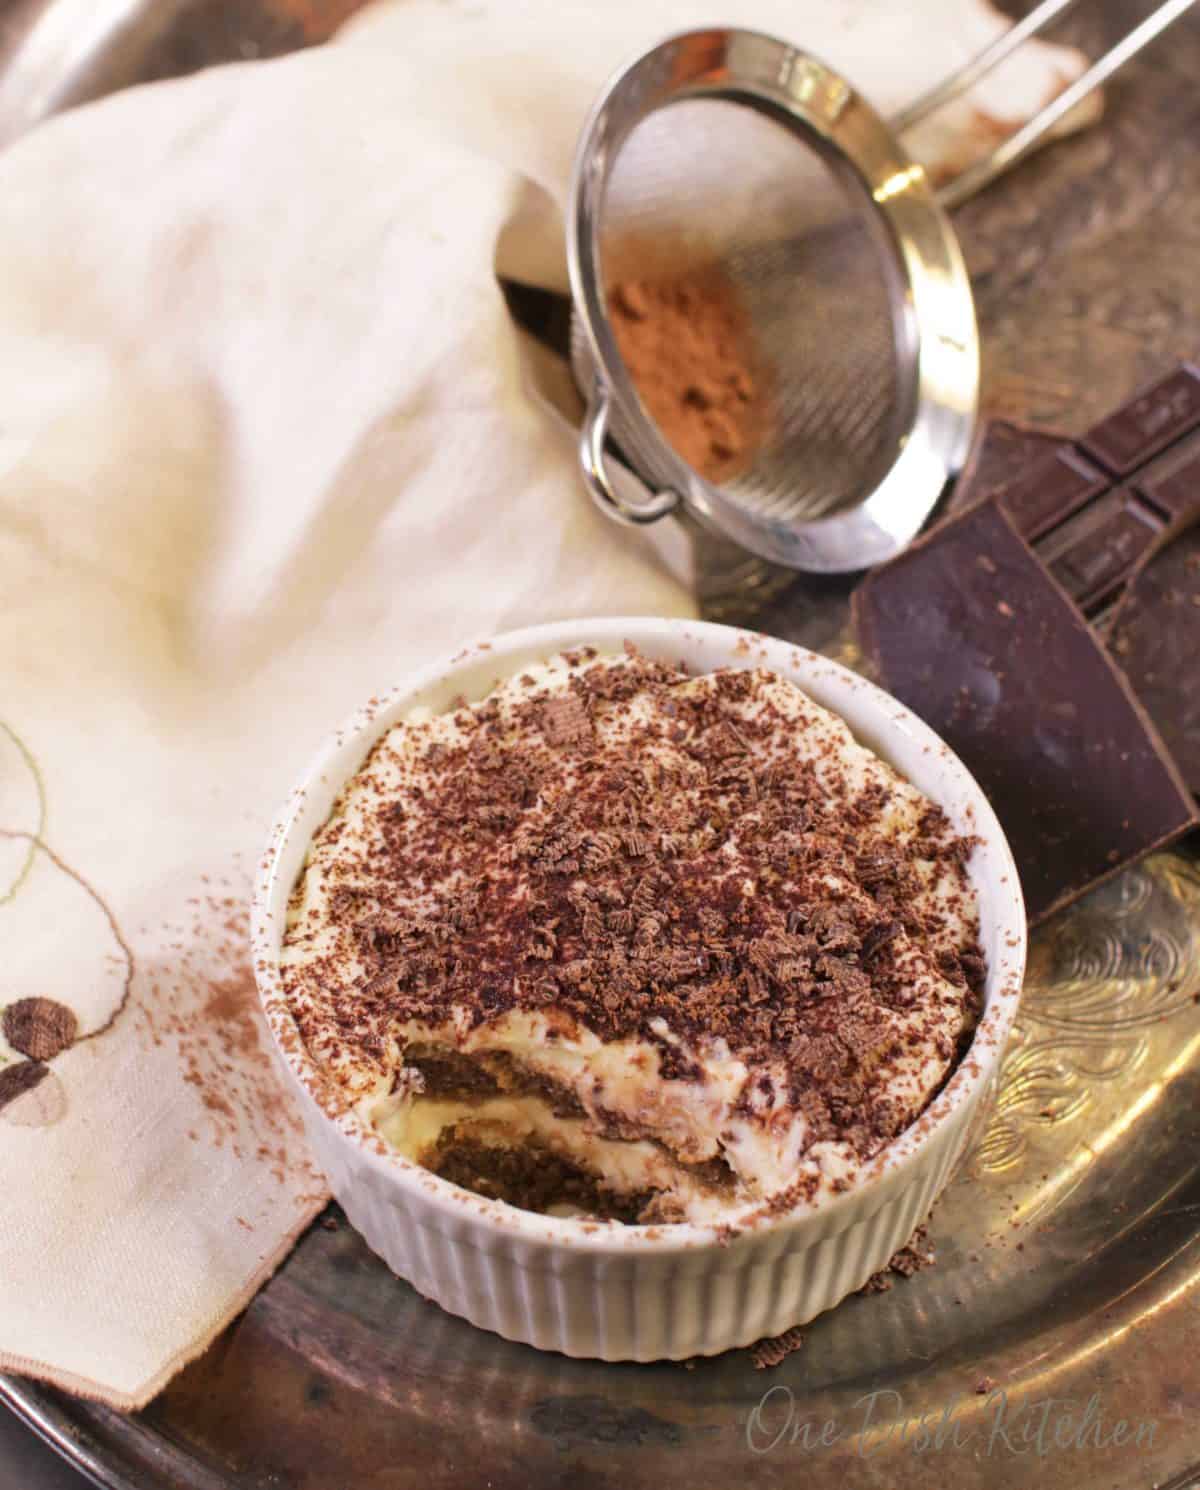 A mini tiramisu topped with chocolate shavings in a ramekin next to a piece of a chocolate bar, a cream-colored cloth napkin, and cocoa powder in a sieve all on a metal tray.